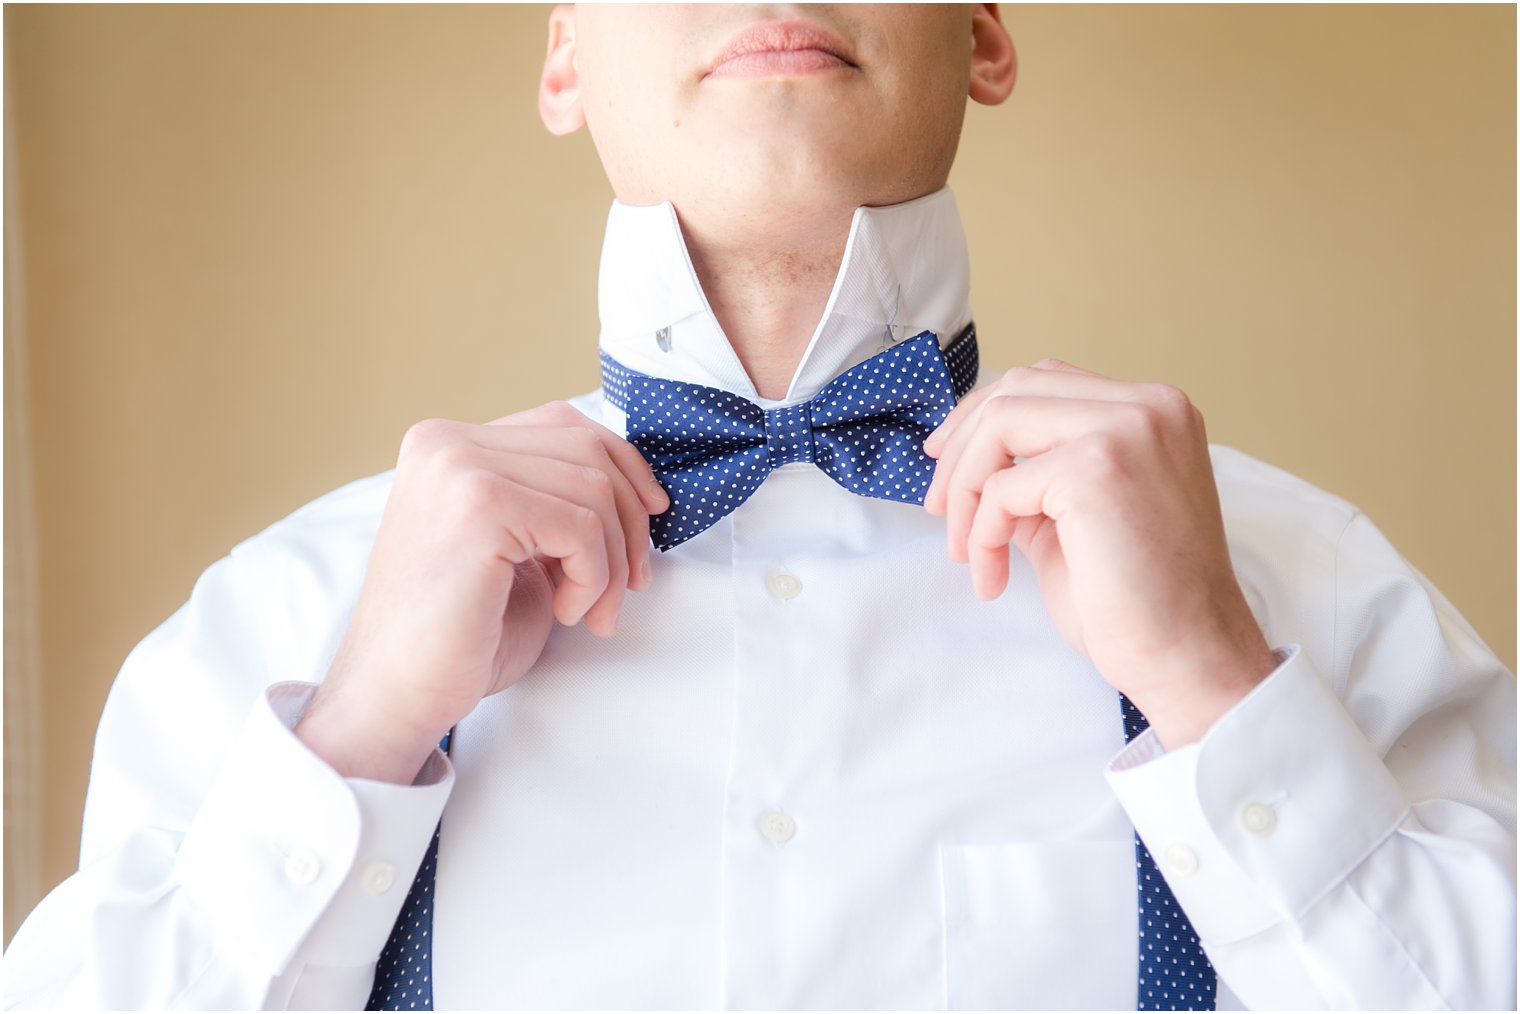 Groom straightening bow tie for wedding day